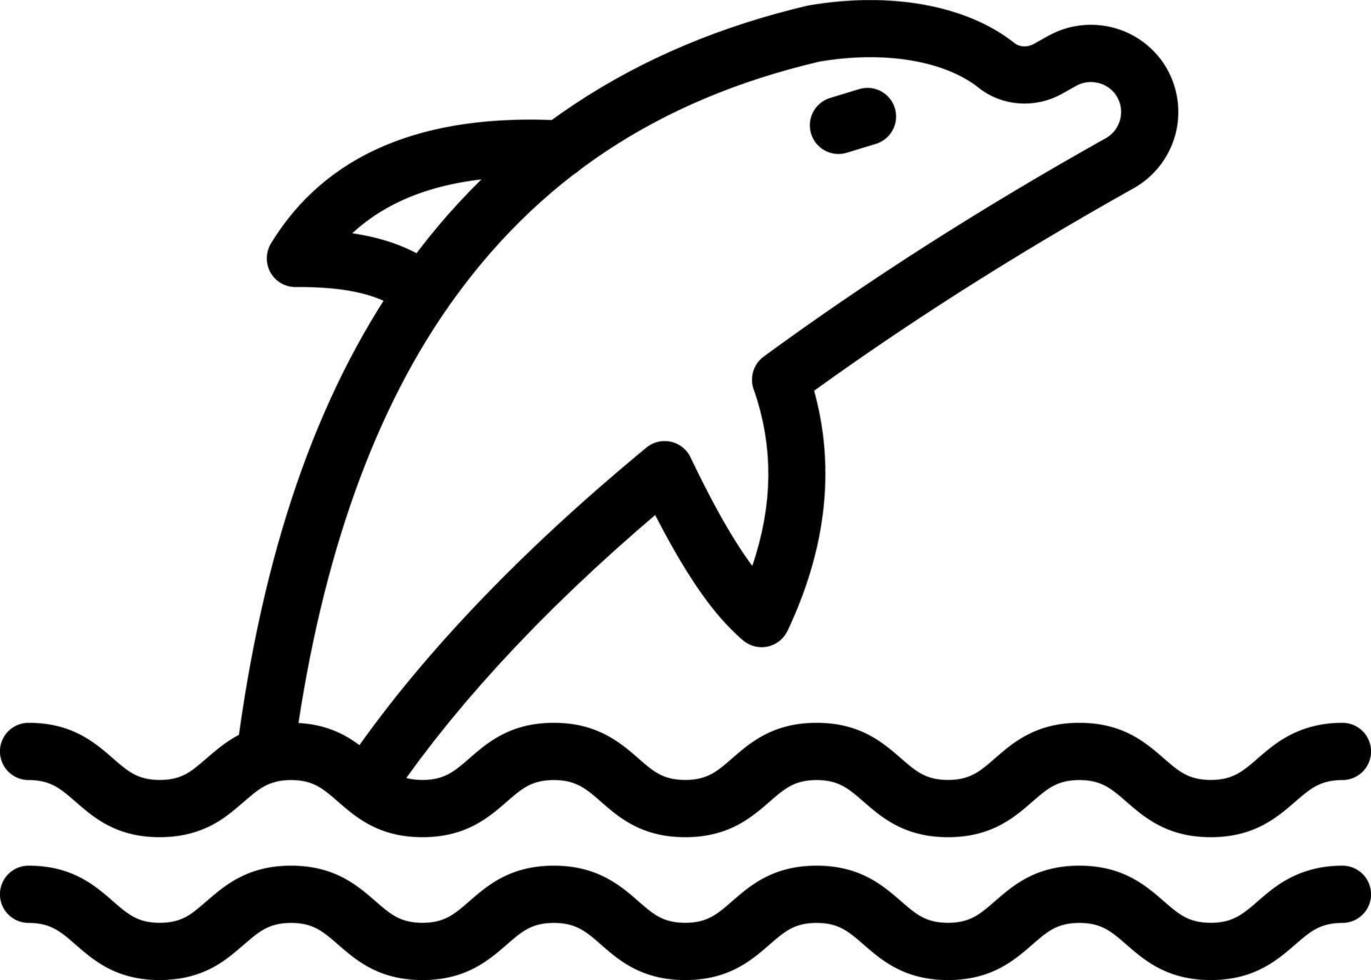 whale vector illustration on a background.Premium quality symbols.vector icons for concept and graphic design.